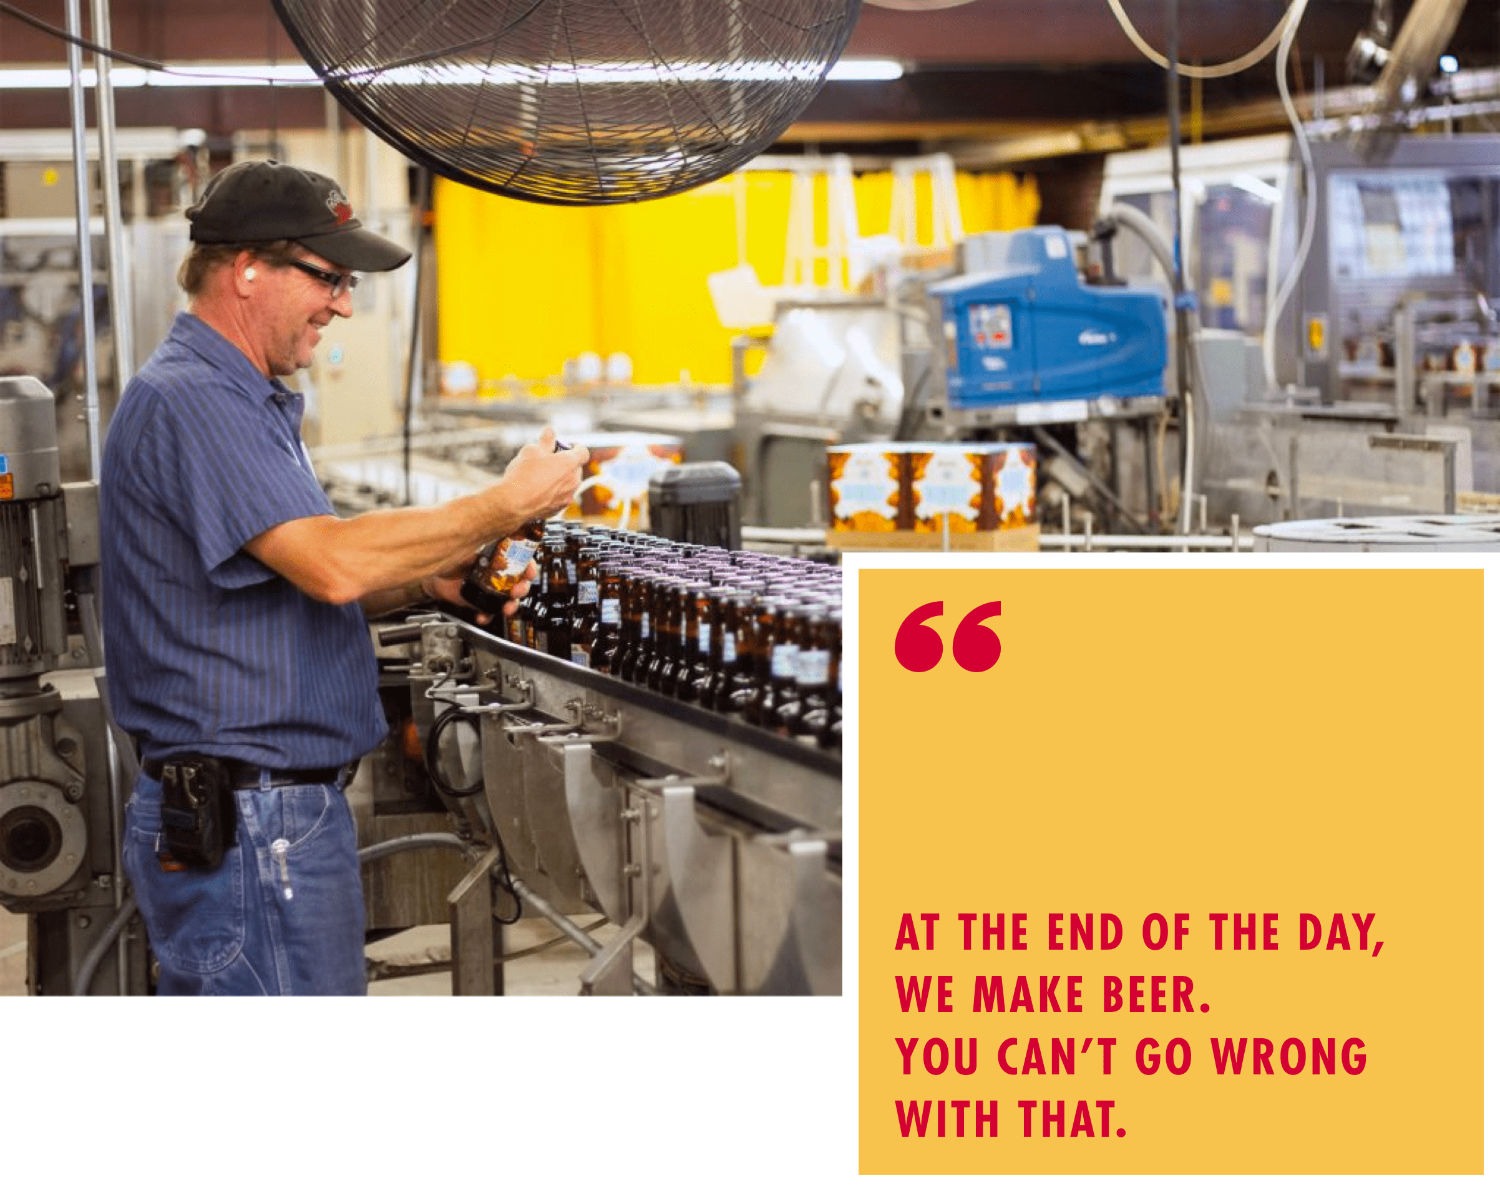 At the end of the day, we make beer. You can’t go wrong with that.